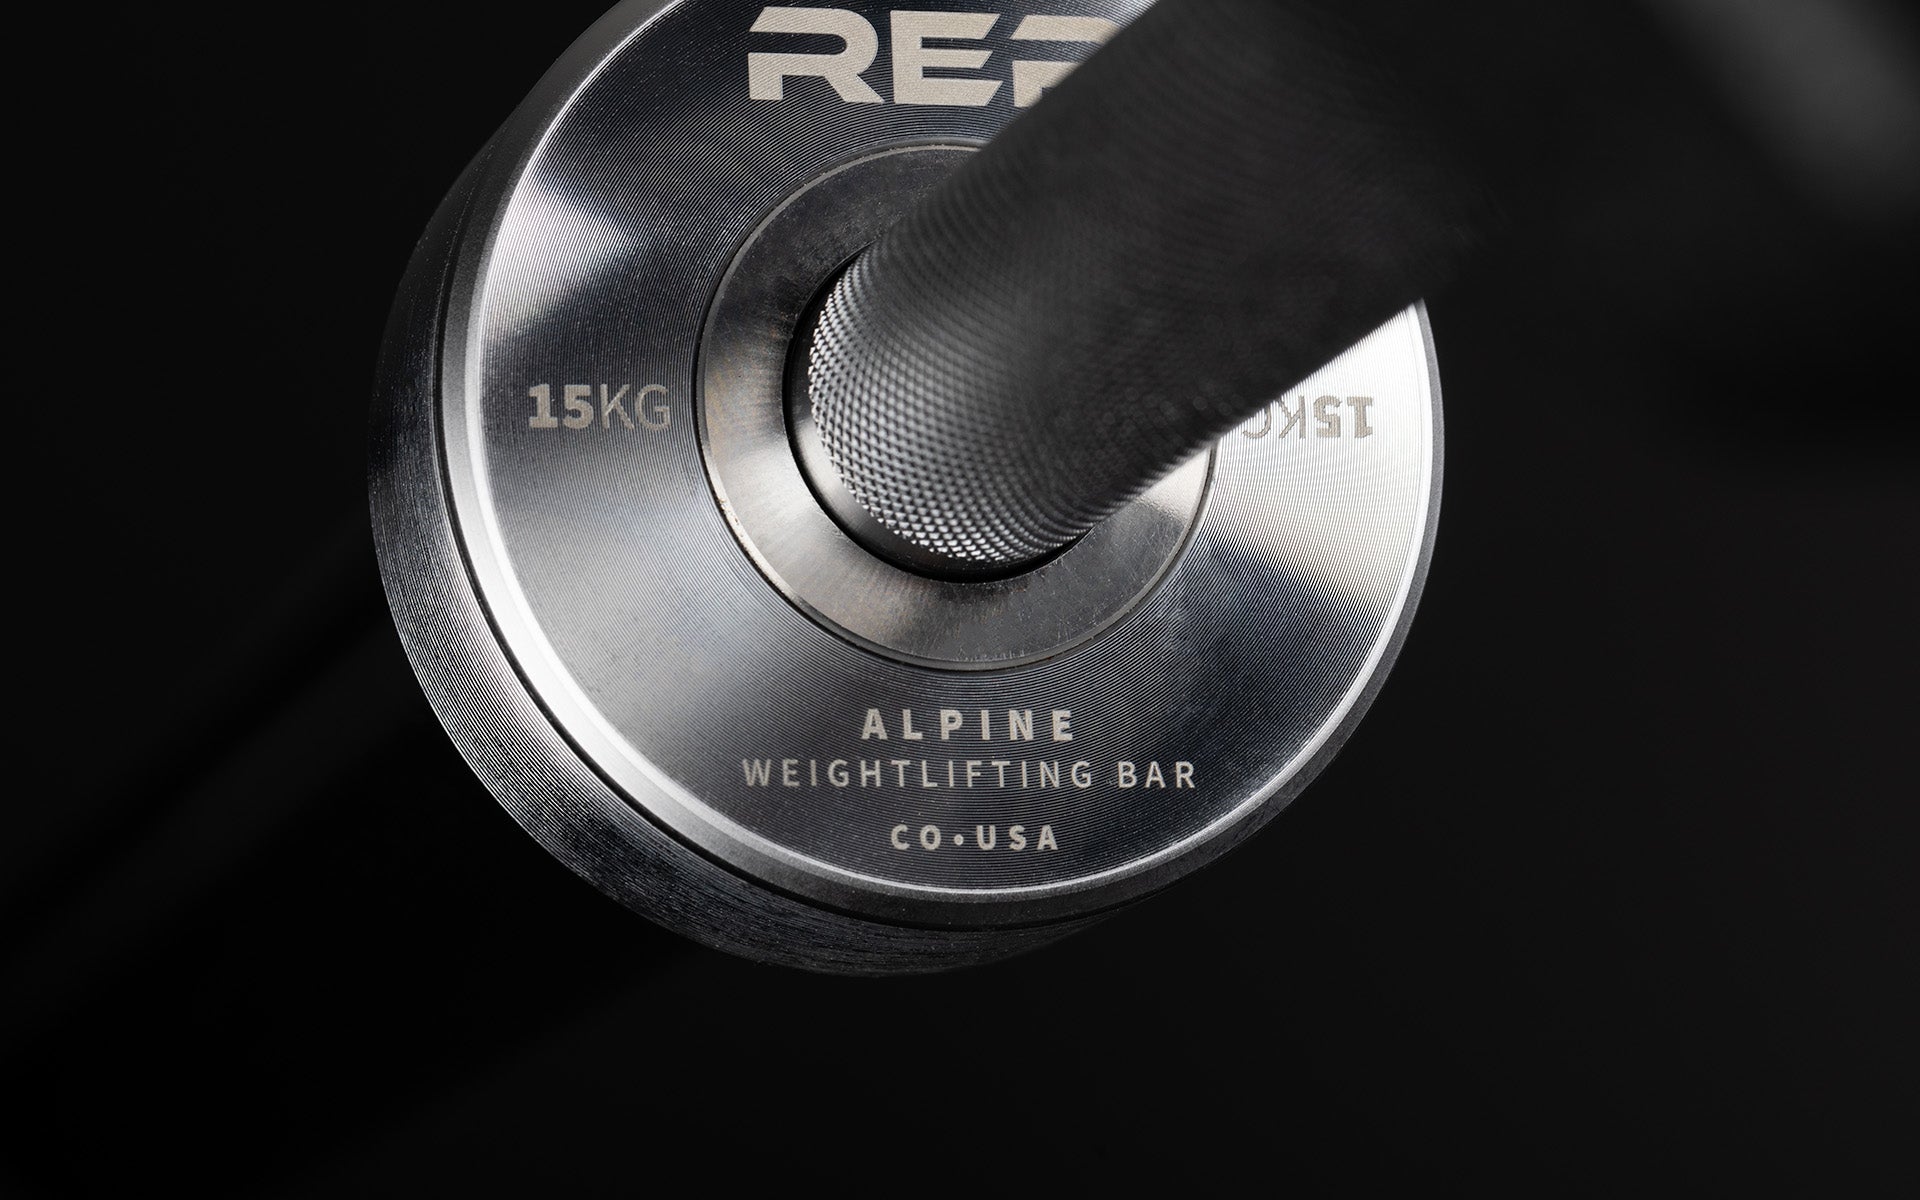 Close-up view of the laser-etched labeling on the inside of the sleeve of a REP 15kg Alpine Weightlifting Bar.